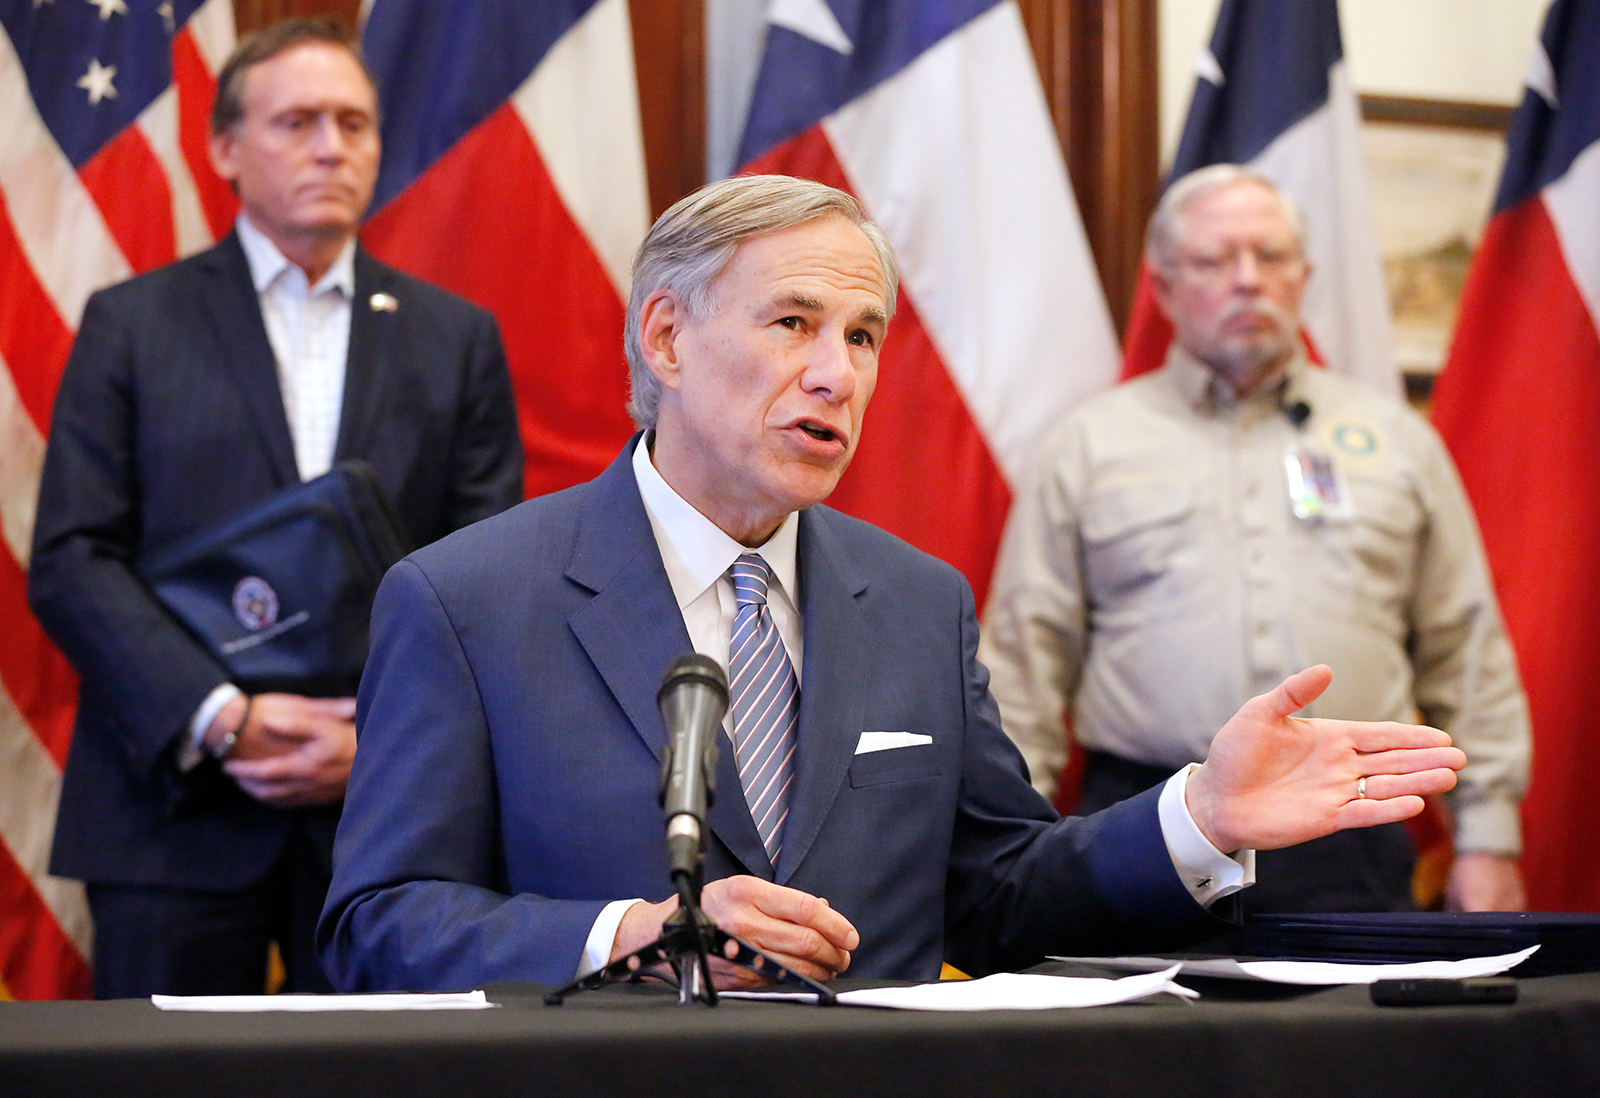 Texas Gov. Greg Abbott appears at a press conference at the Texas State Capitol in Austin, on March 29.